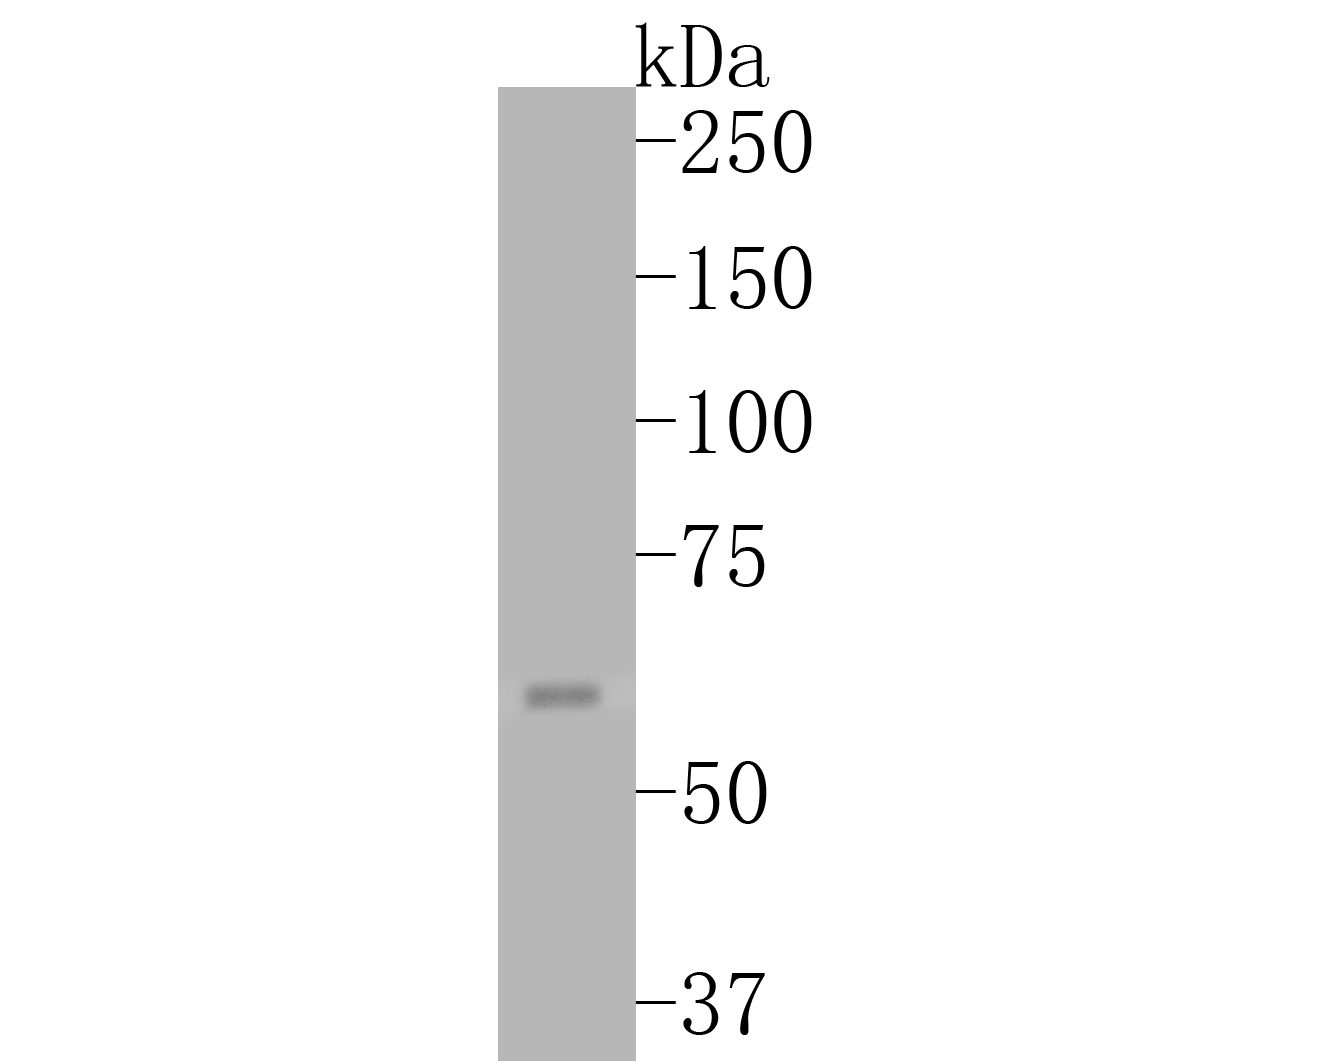 Western blot analysis of COX2 on A549 cell lysates. Proteins were transferred to a PVDF membrane and blocked with 5% BSA in PBS for 1 hour at room temperature. The primary antibody (EM1902-12, 1/500) was used in 5% BSA at room temperature for 2 hours. Goat Anti-Mouse IgG - HRP Secondary Antibody (HA1006) at 1:5,000 dilution was used for 1 hour at room temperature.